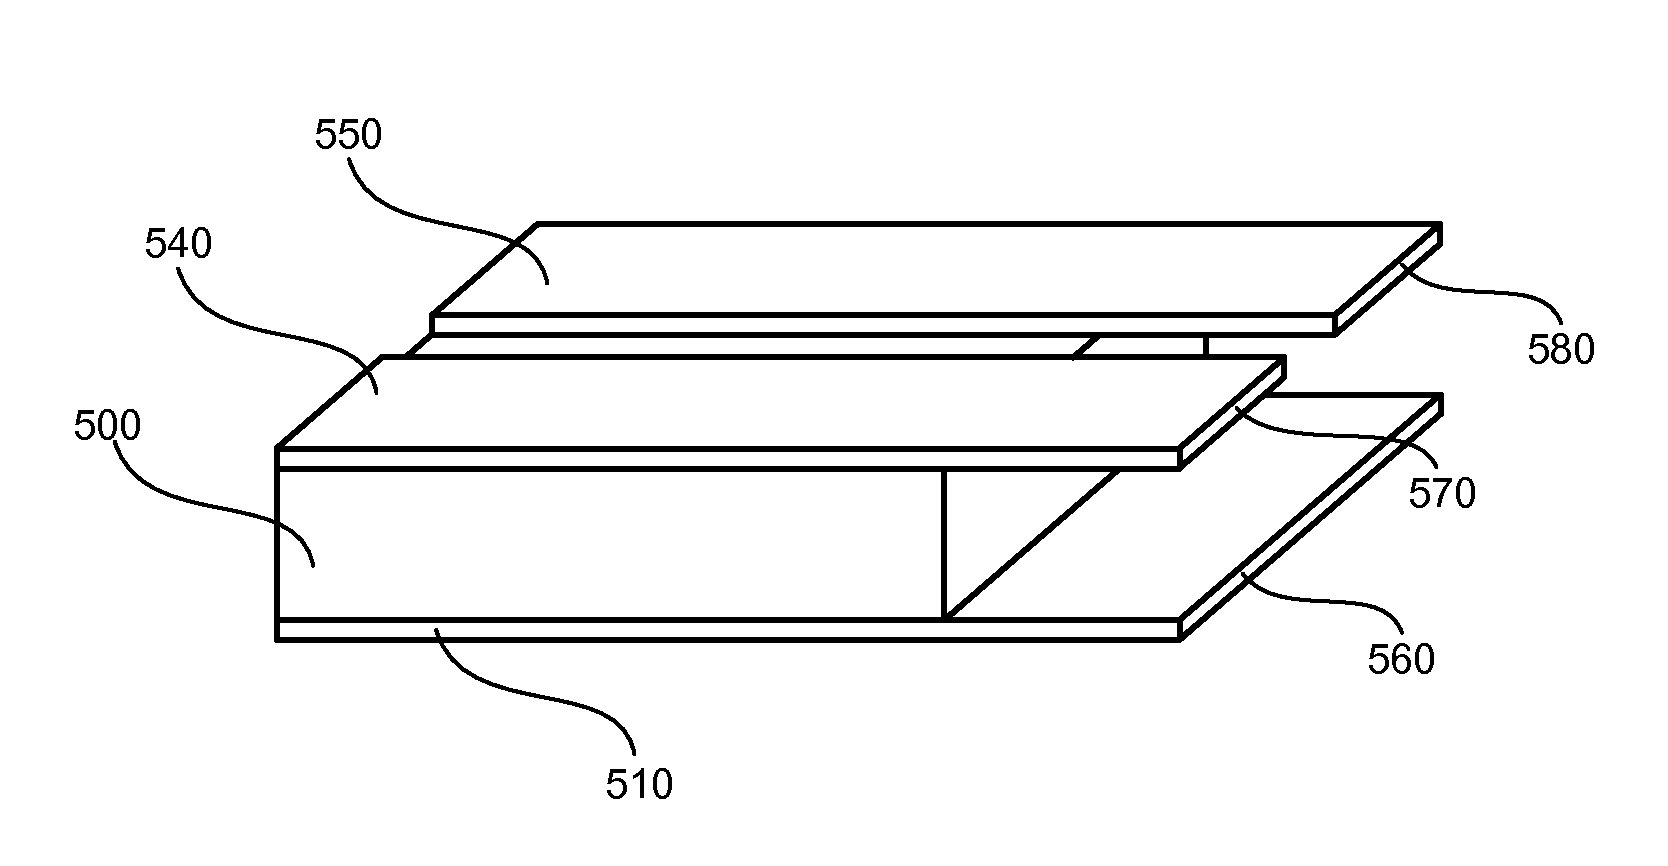 Ultra-small chip package and method for manufacturing the same